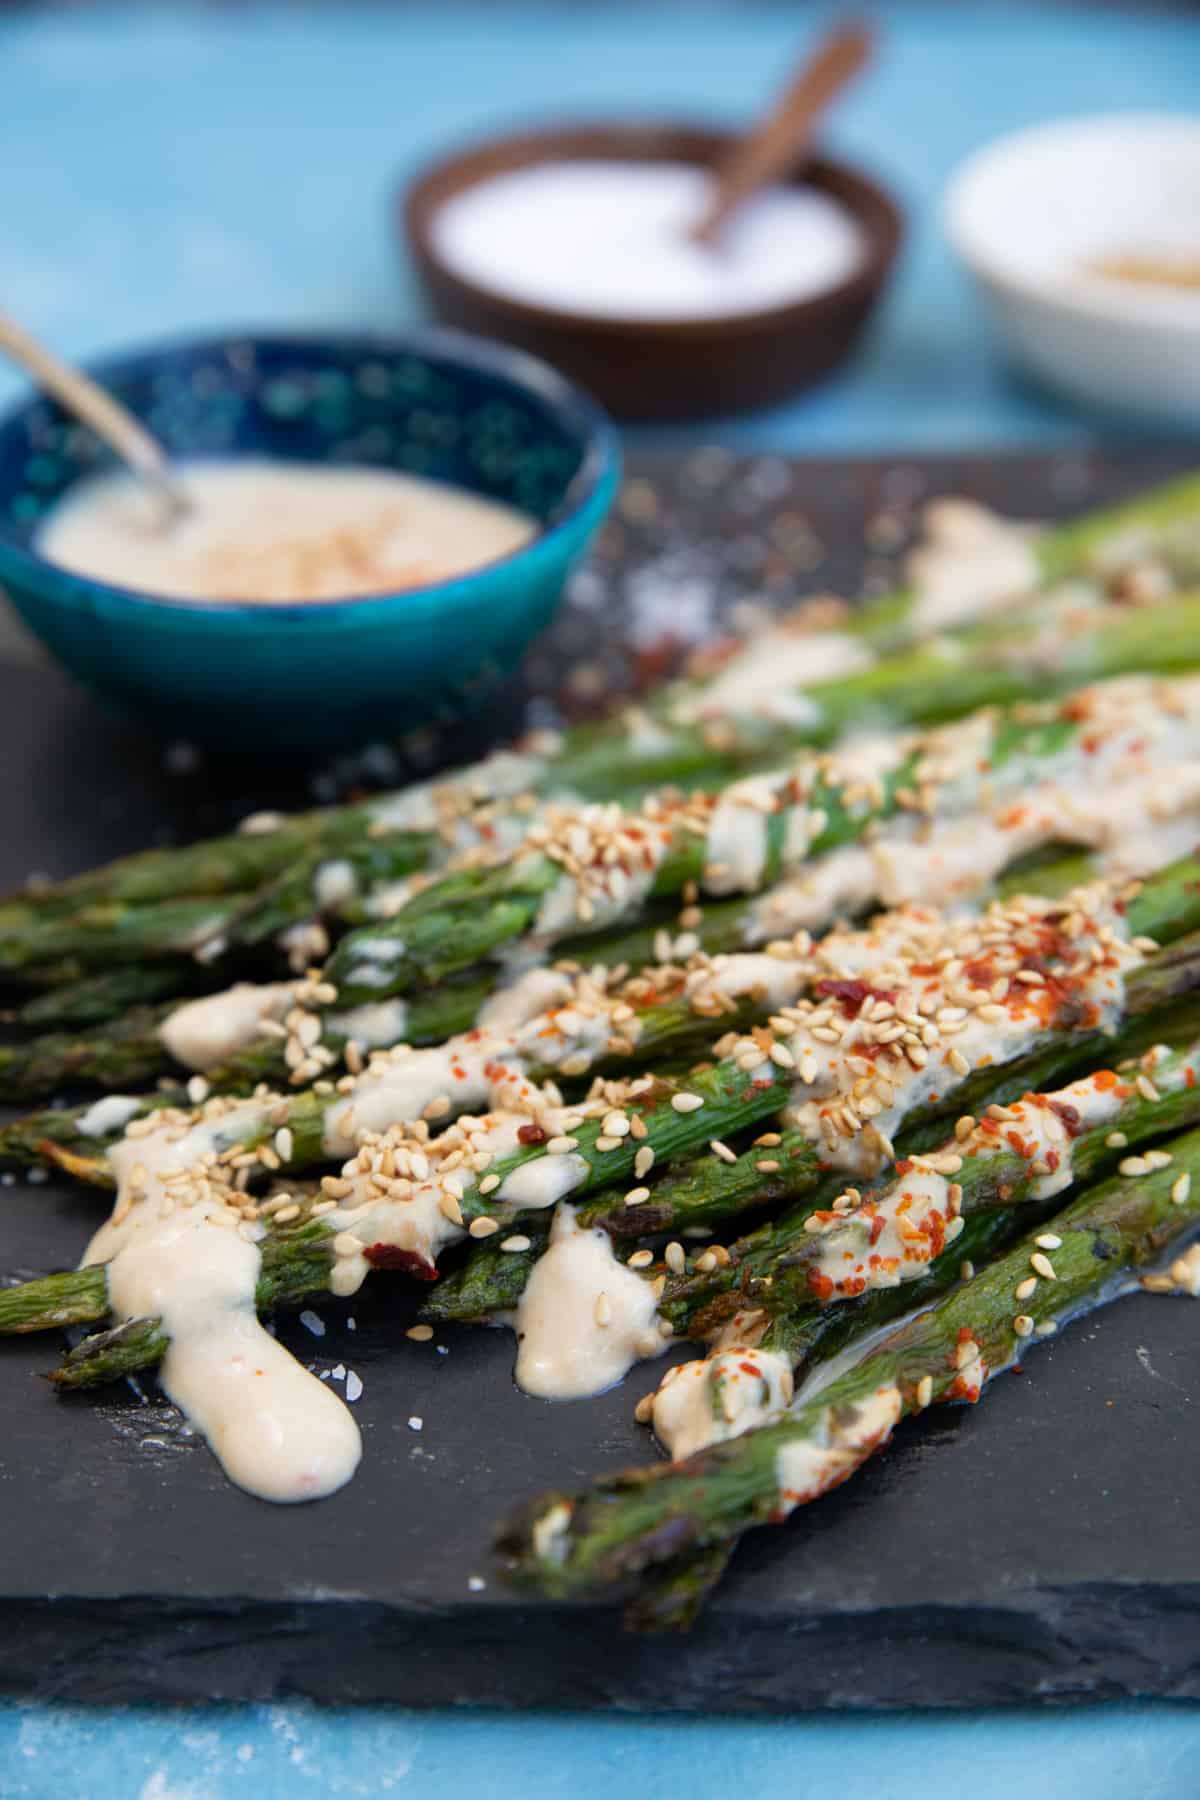 Grilled asparagus is ready in 15 minutes and is the perfect side for barbecue. Crisp on the outside with a smokey flavor, this healthy side dish is everyone's favorite.
